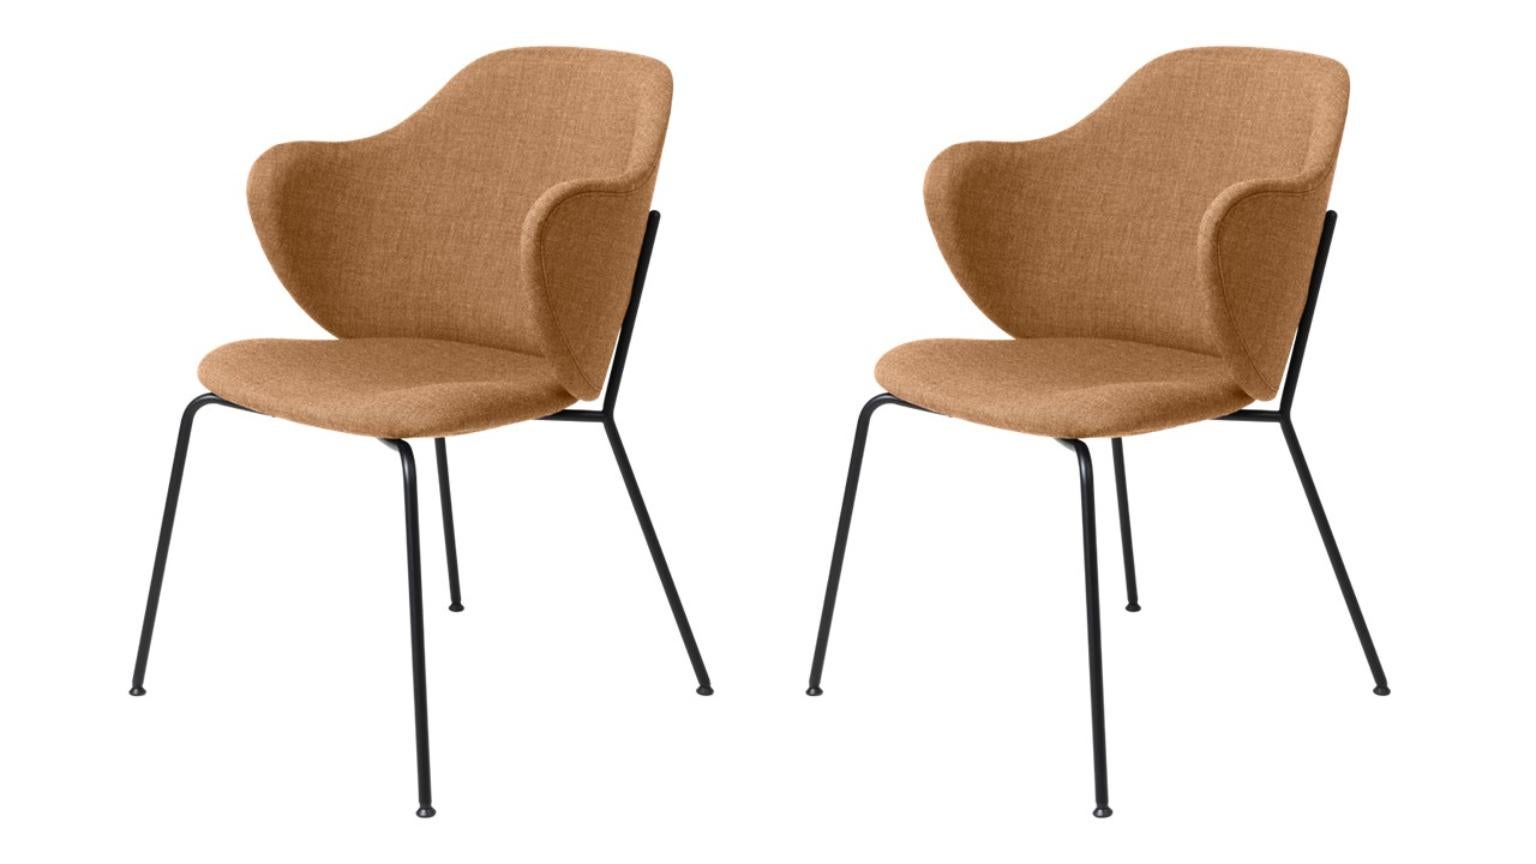 Set of 2 brown remix Lassen chairs by Lassen.
Dimensions : W 58 x D 60 x H 88 cm. 
Materials : Textile.

The Lassen chair by Flemming Lassen, Magnus Sangild and Marianne Viktor was launched in 2018 as an ode to Flemming Lassen’s uncompromising